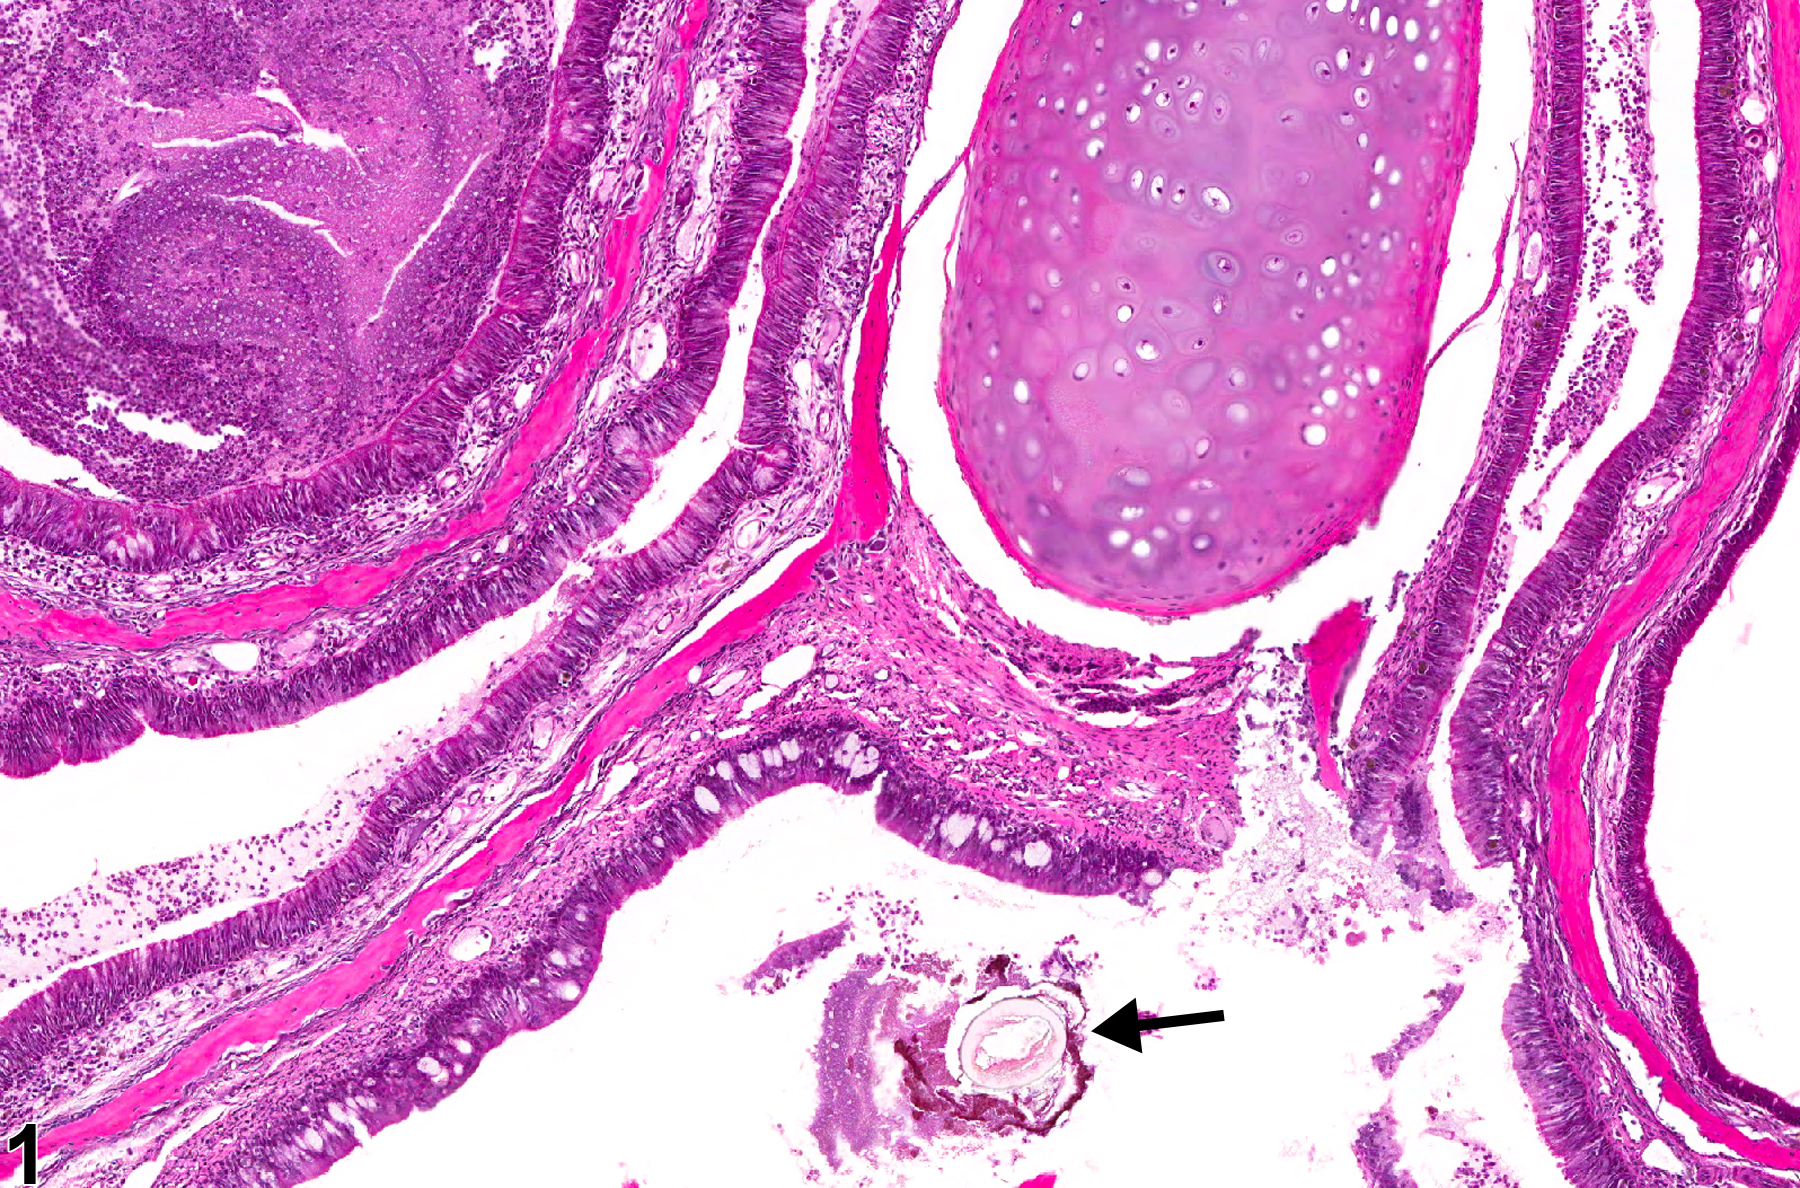 Image of foreign body in the nose from a female F344/N rat in a chronic study